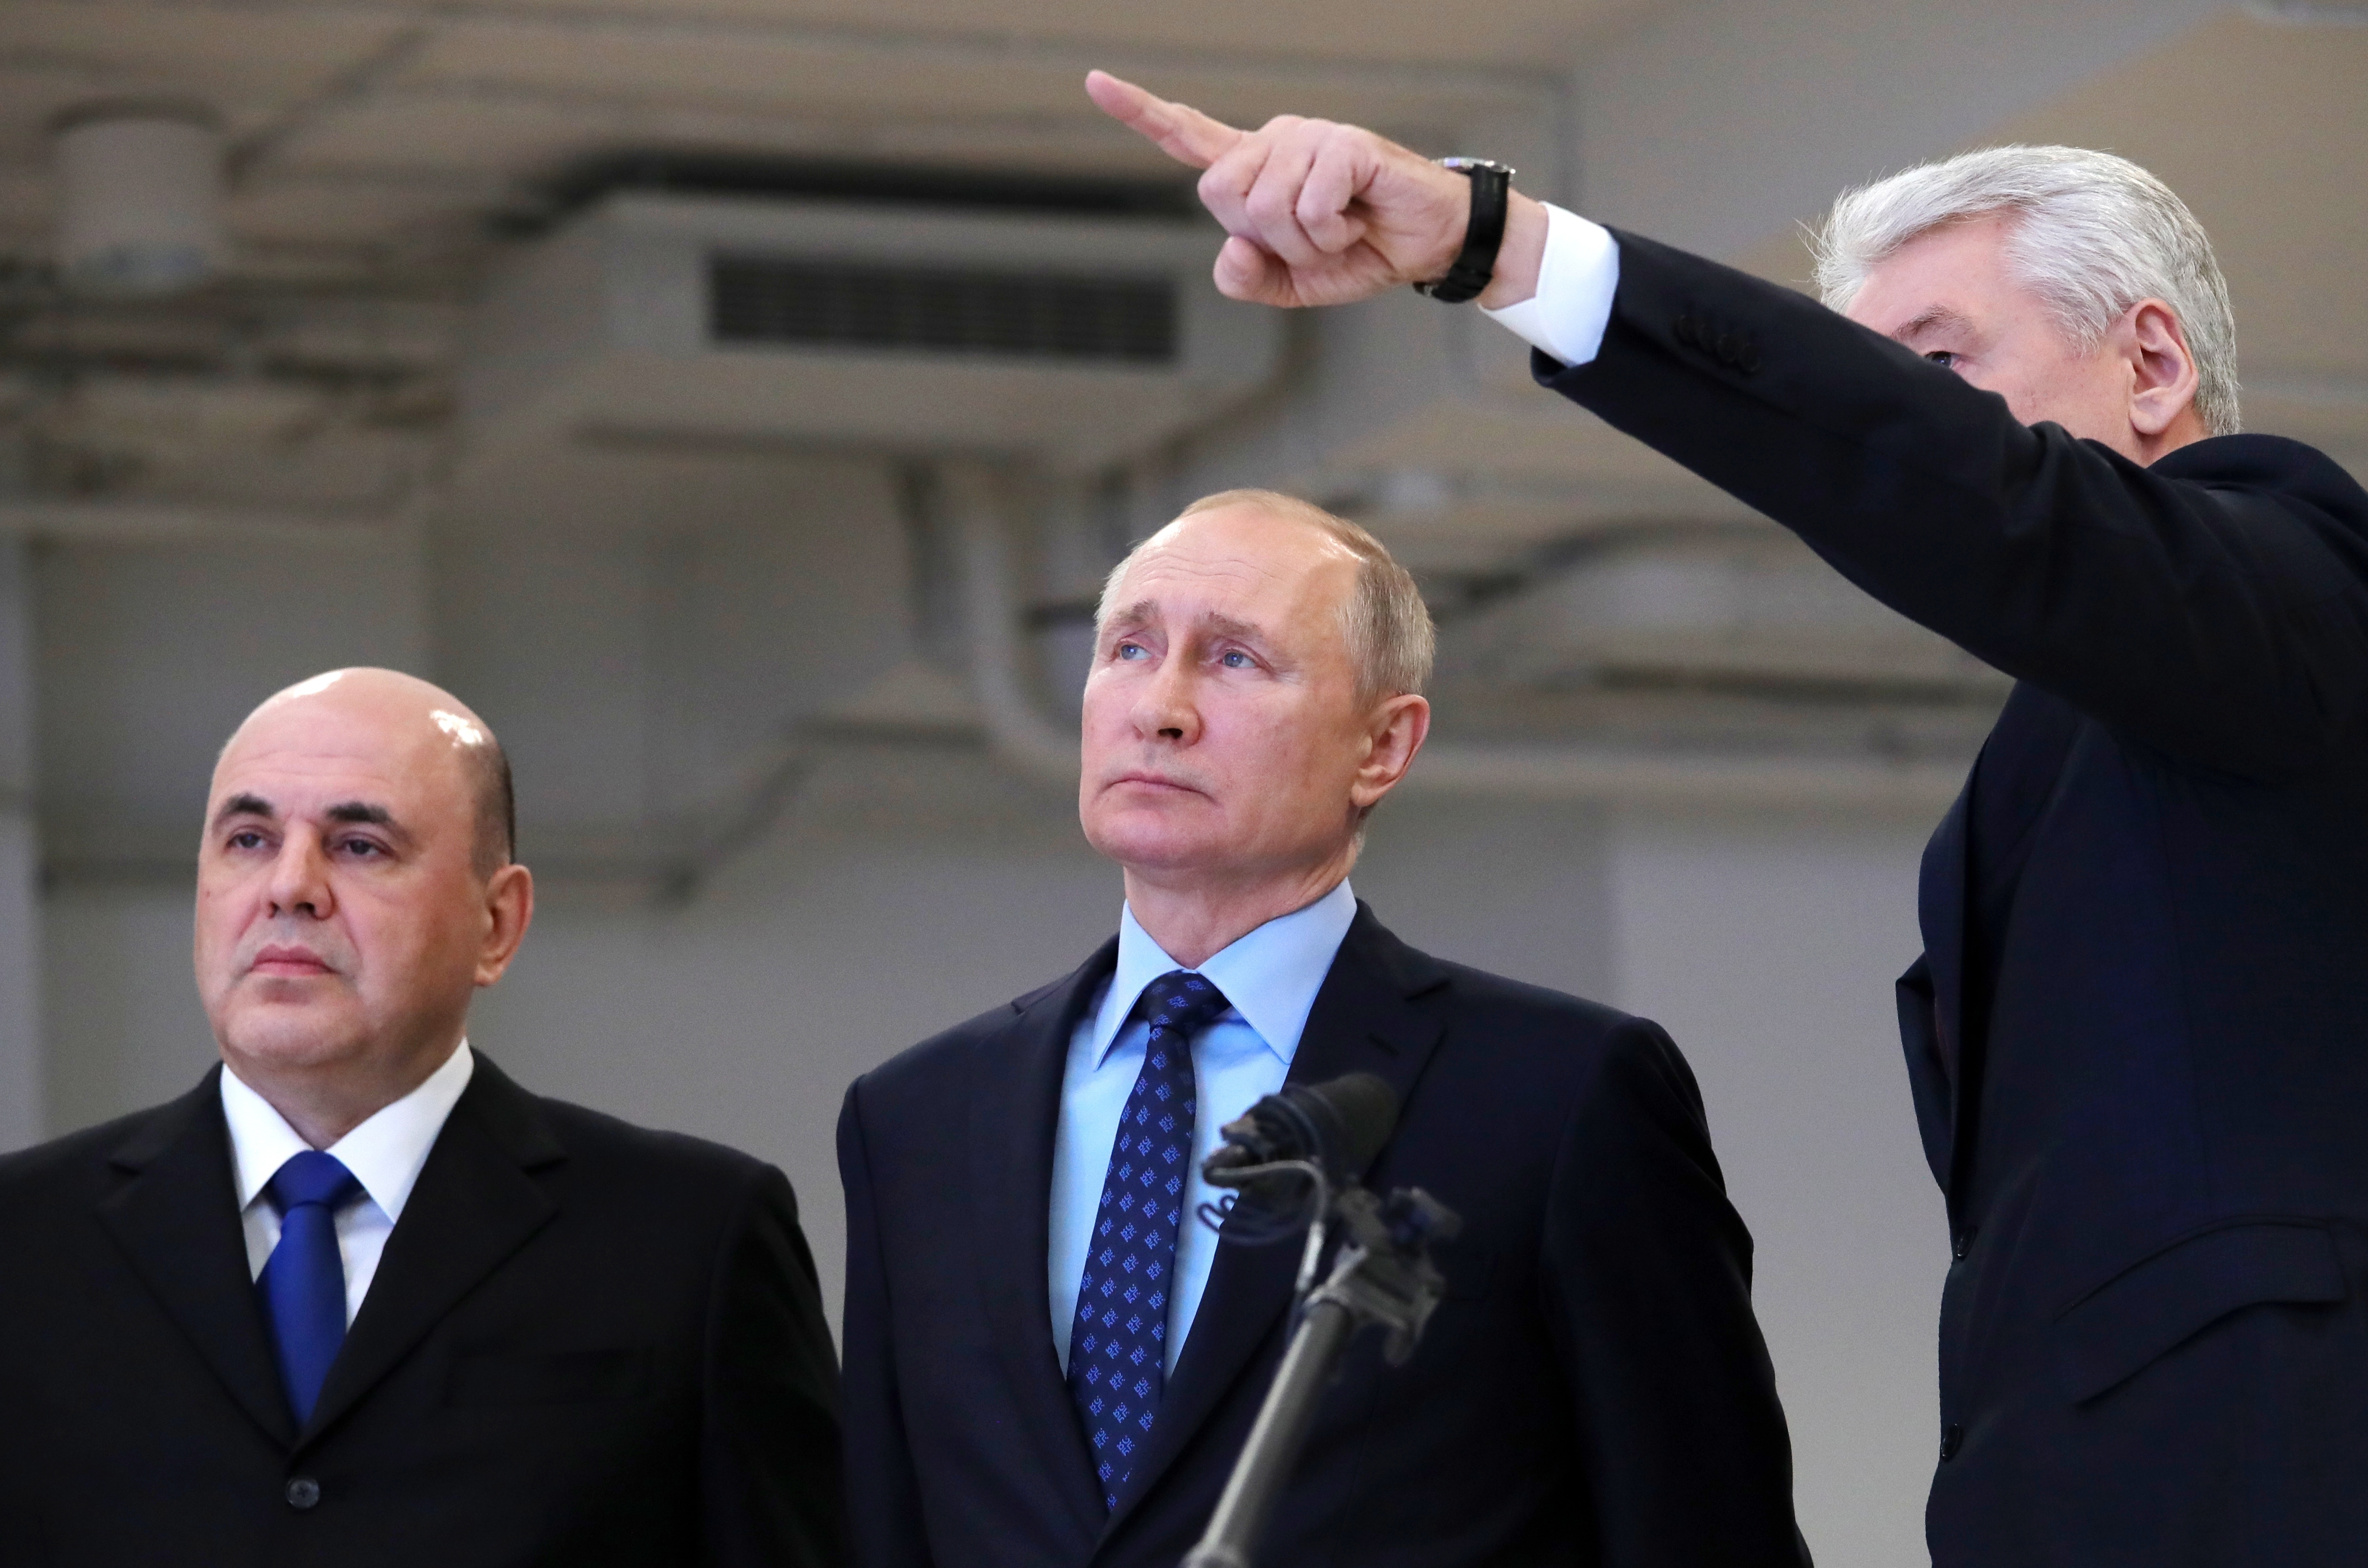 Moscow Mayor Sergei Sobyanin, right, points as he speaks to Russian President Vladimir Putin, center, and Prime Minister Mikhail Mishustin, left, during their visit a call centre of the emergency response centre on control and monitoring of the coronavirus disease.